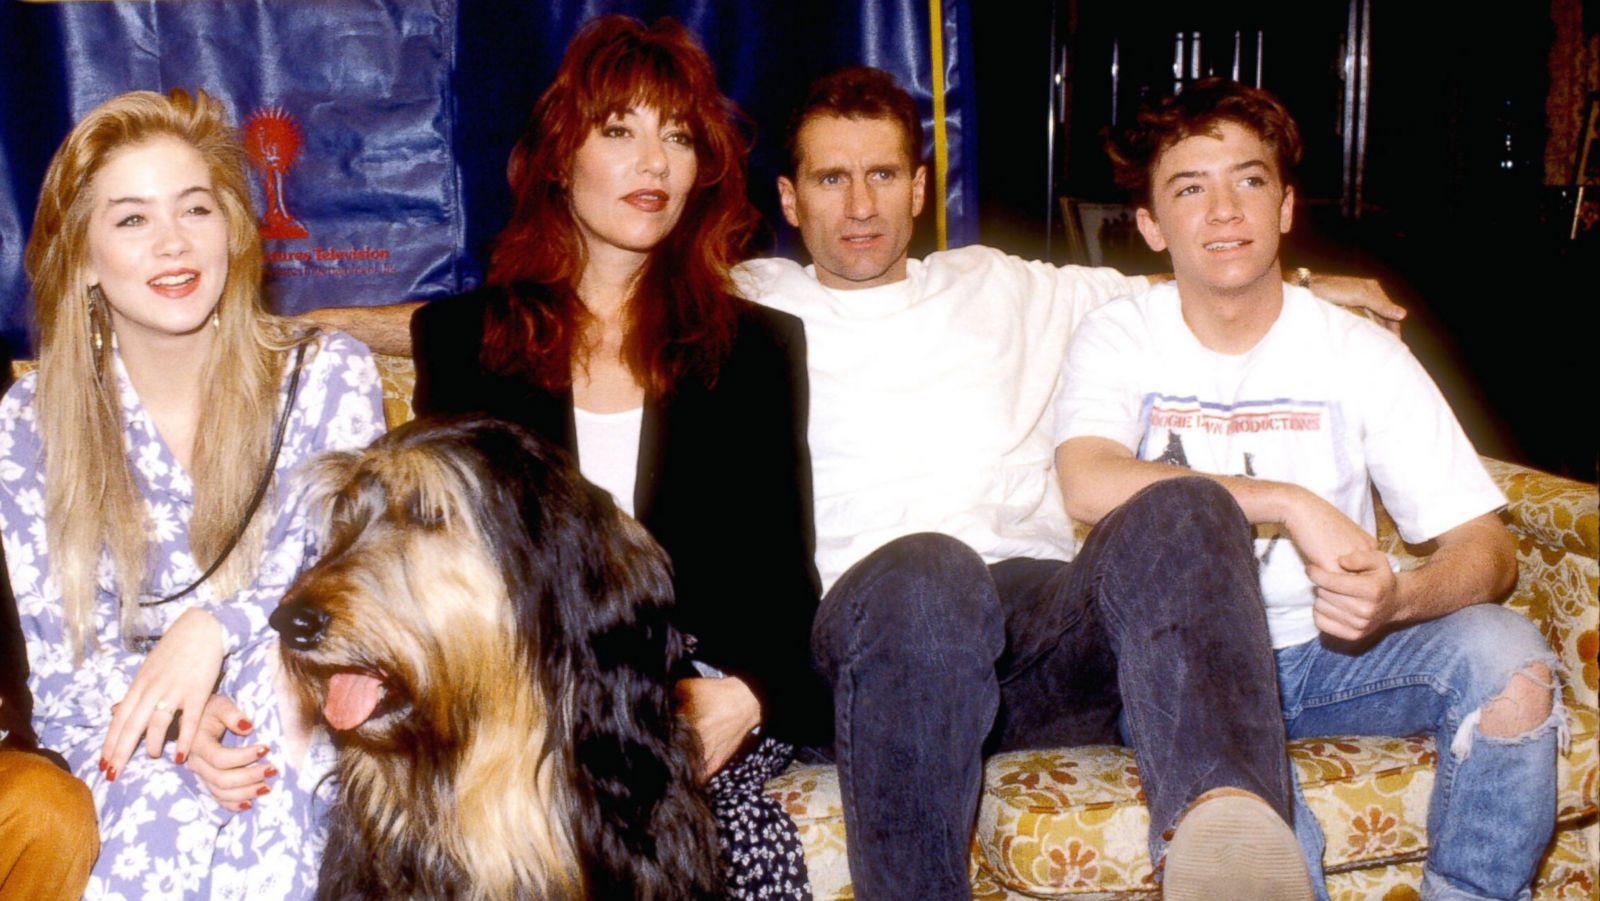 'Married with Children' cast Christina Applegate, Katey Sagal, Ed O'Neill, and David Faustino circa 1990s